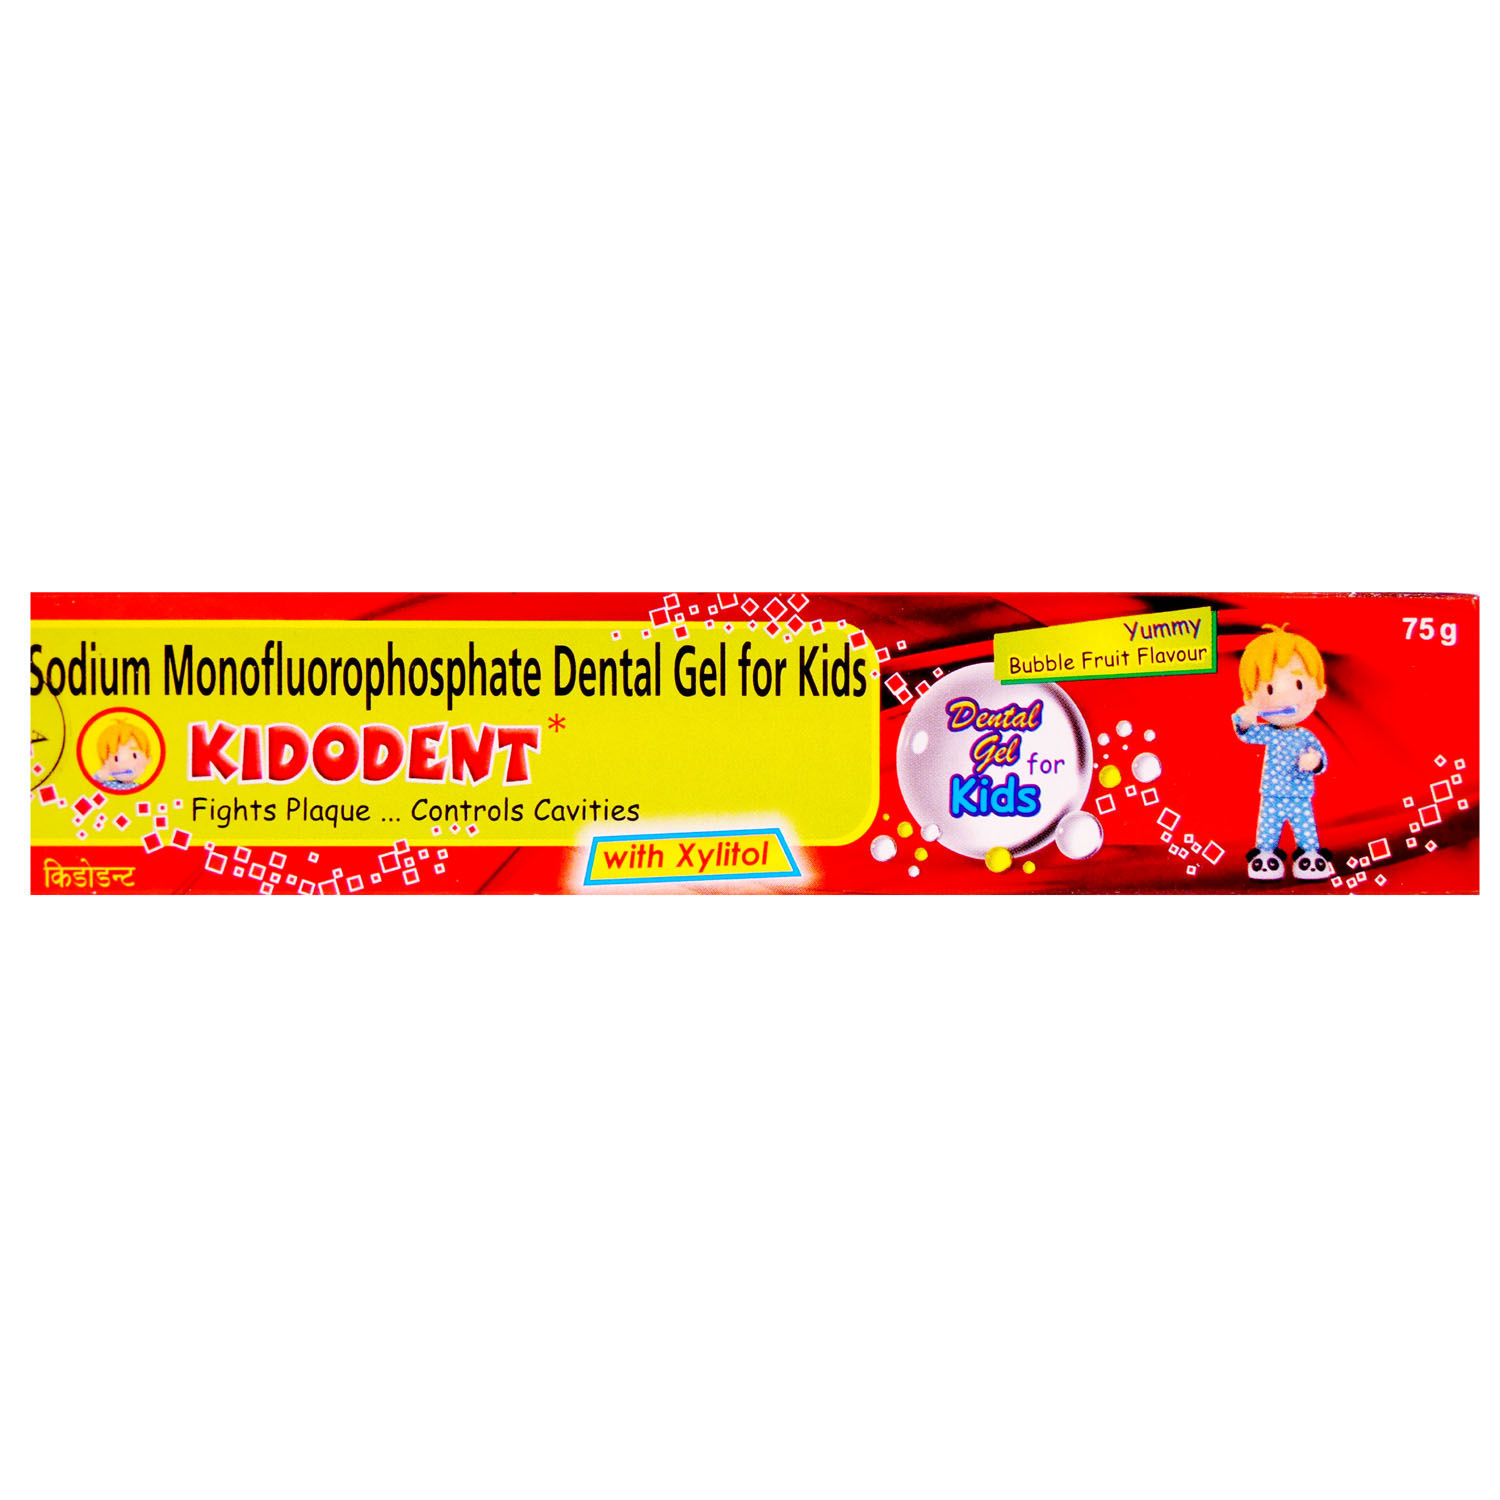 Kidodent Bubble Fruit Flavoured Kids Toothpaste, 75 gm, Pack of 1 